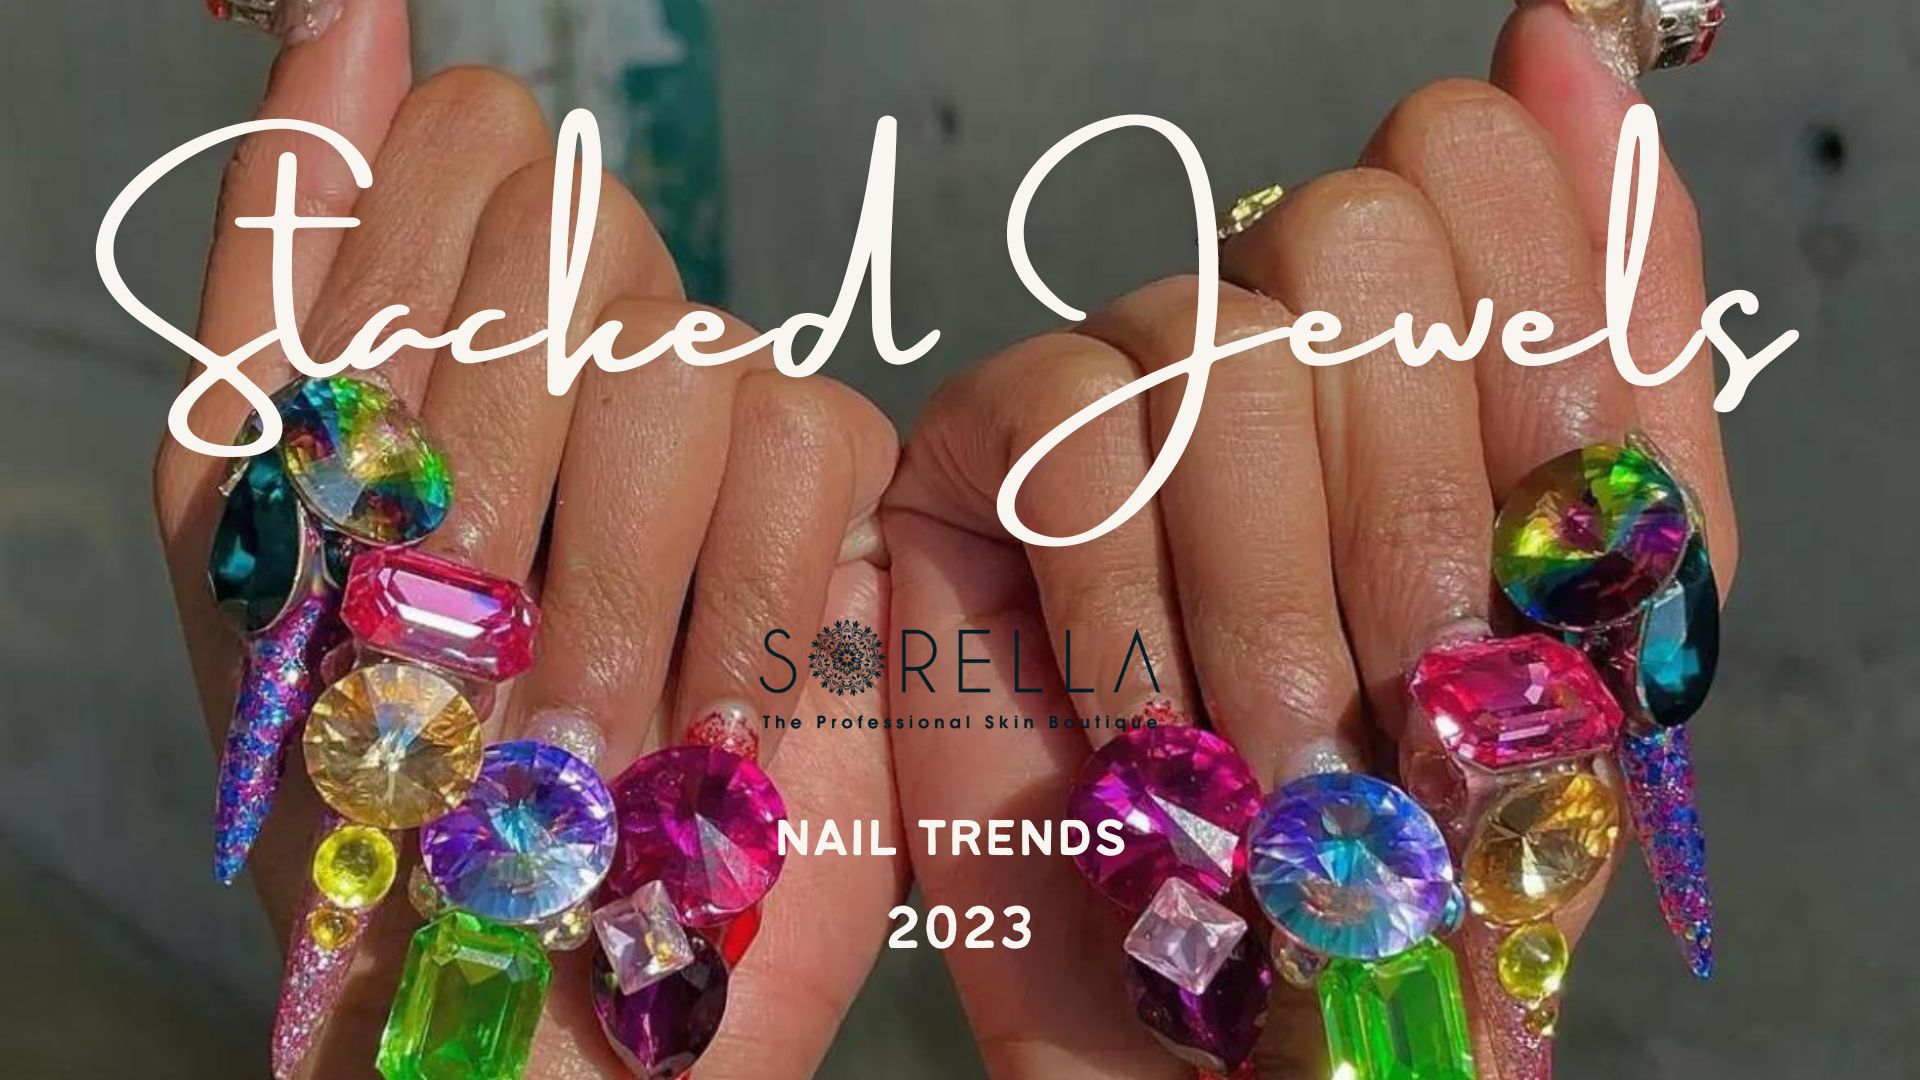 Nail trends 2023